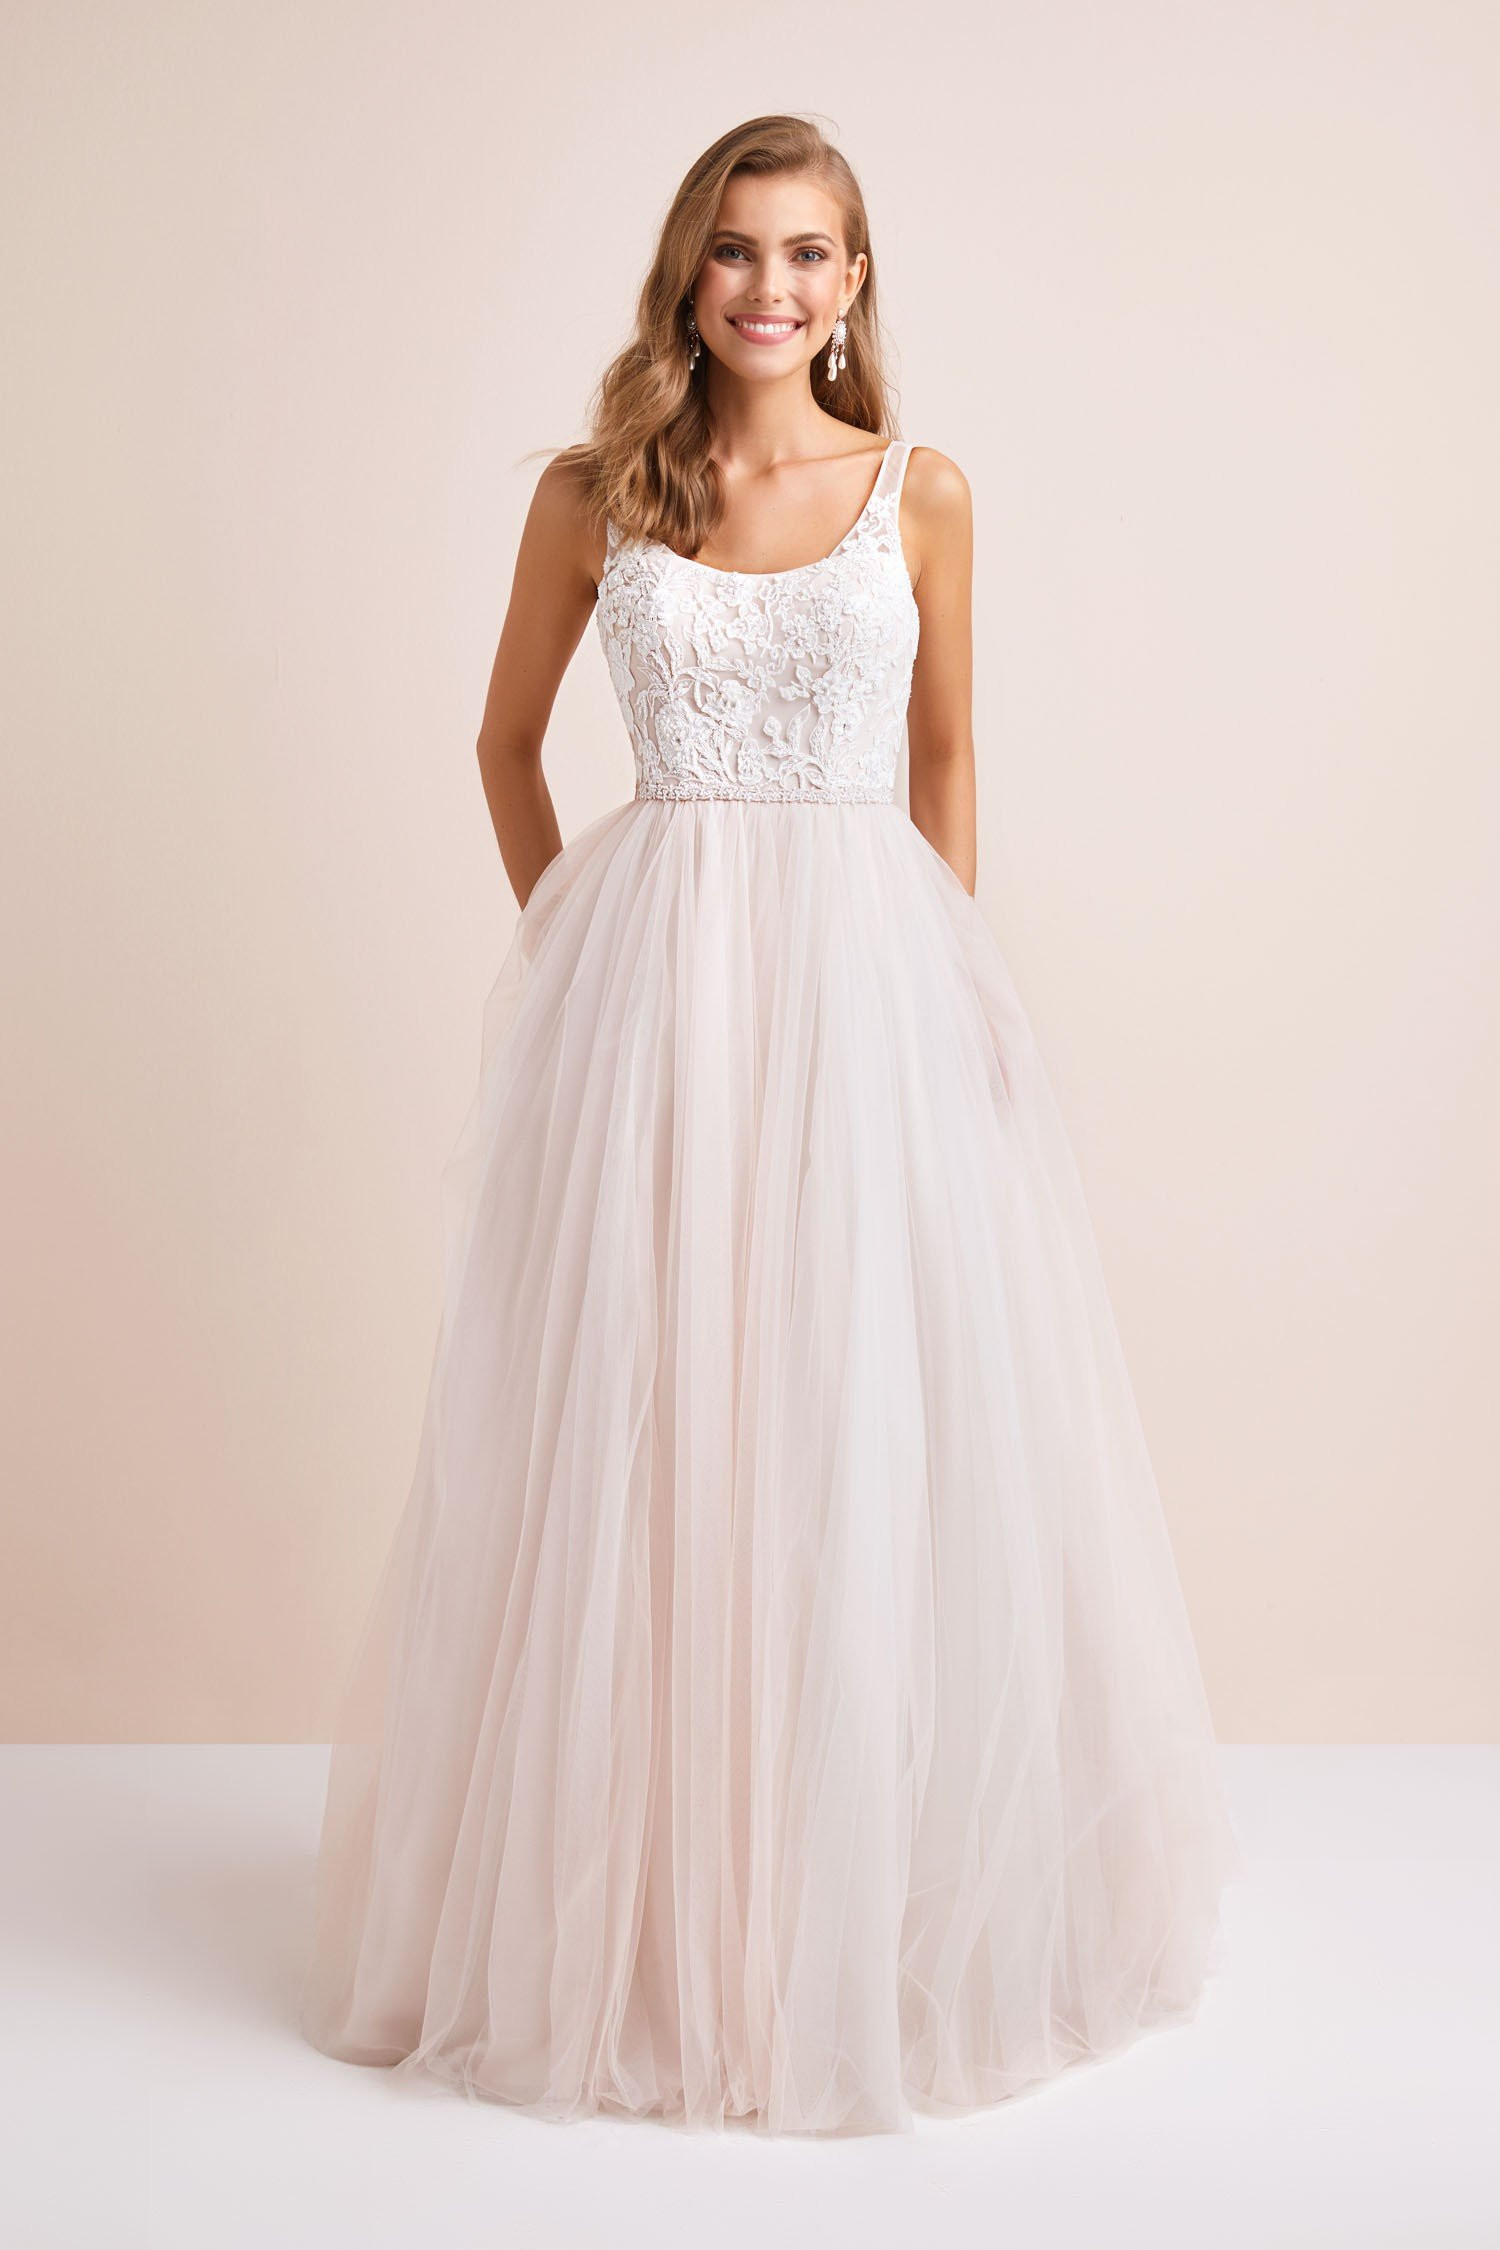 Lace And Tulle Wedding Dress
 Lace and Tulle Ball Gown Wedding Dress with Ribbon ntwg3905